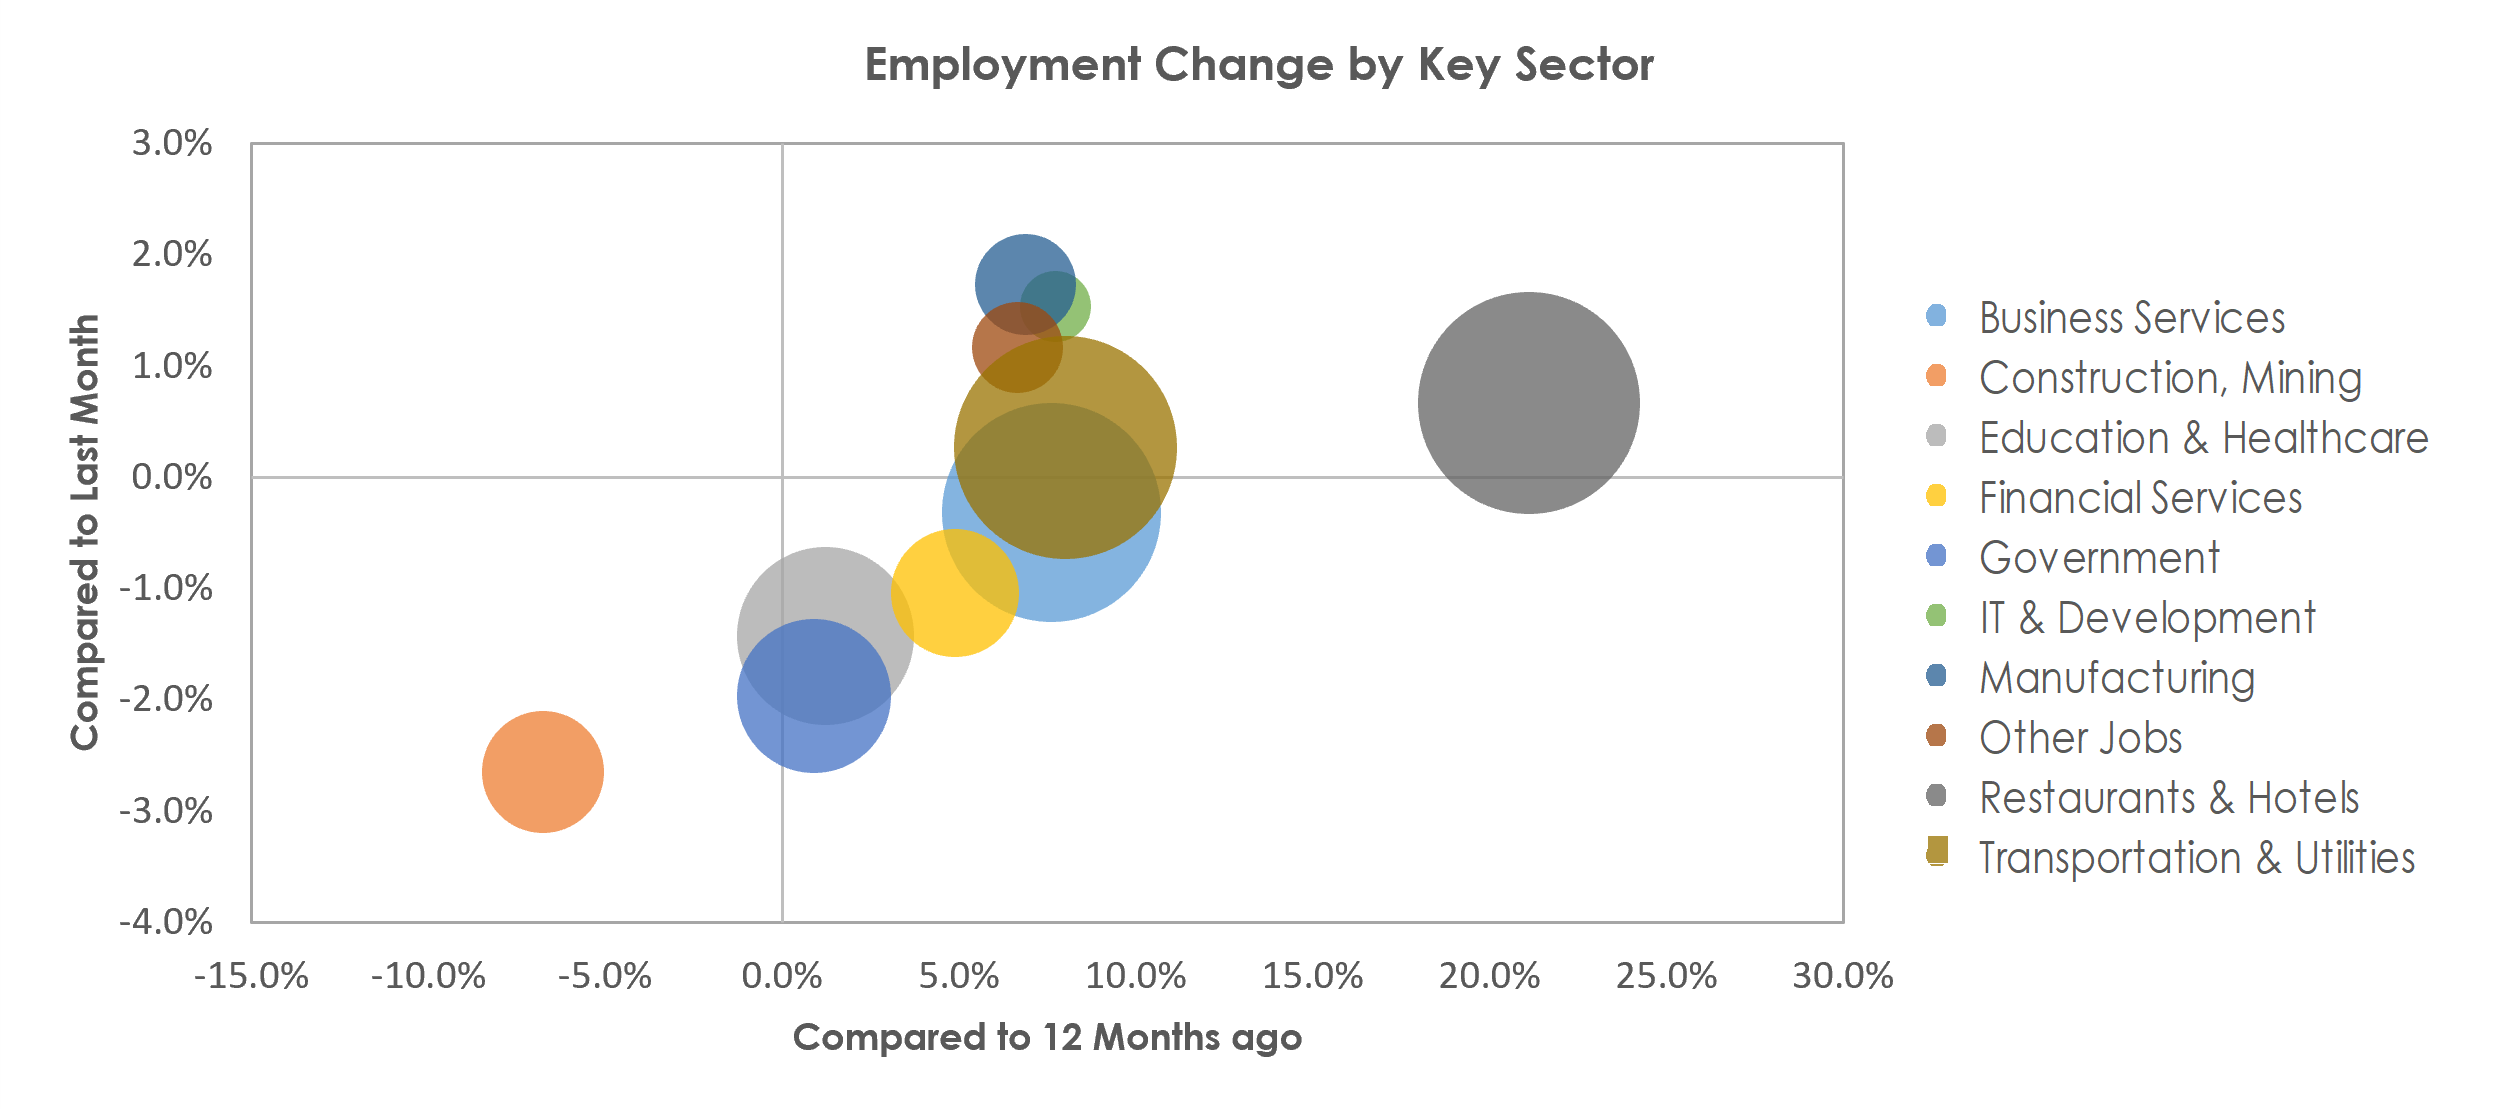 Orlando-Kissimmee-Sanford, FL Unemployment by Industry May 2022